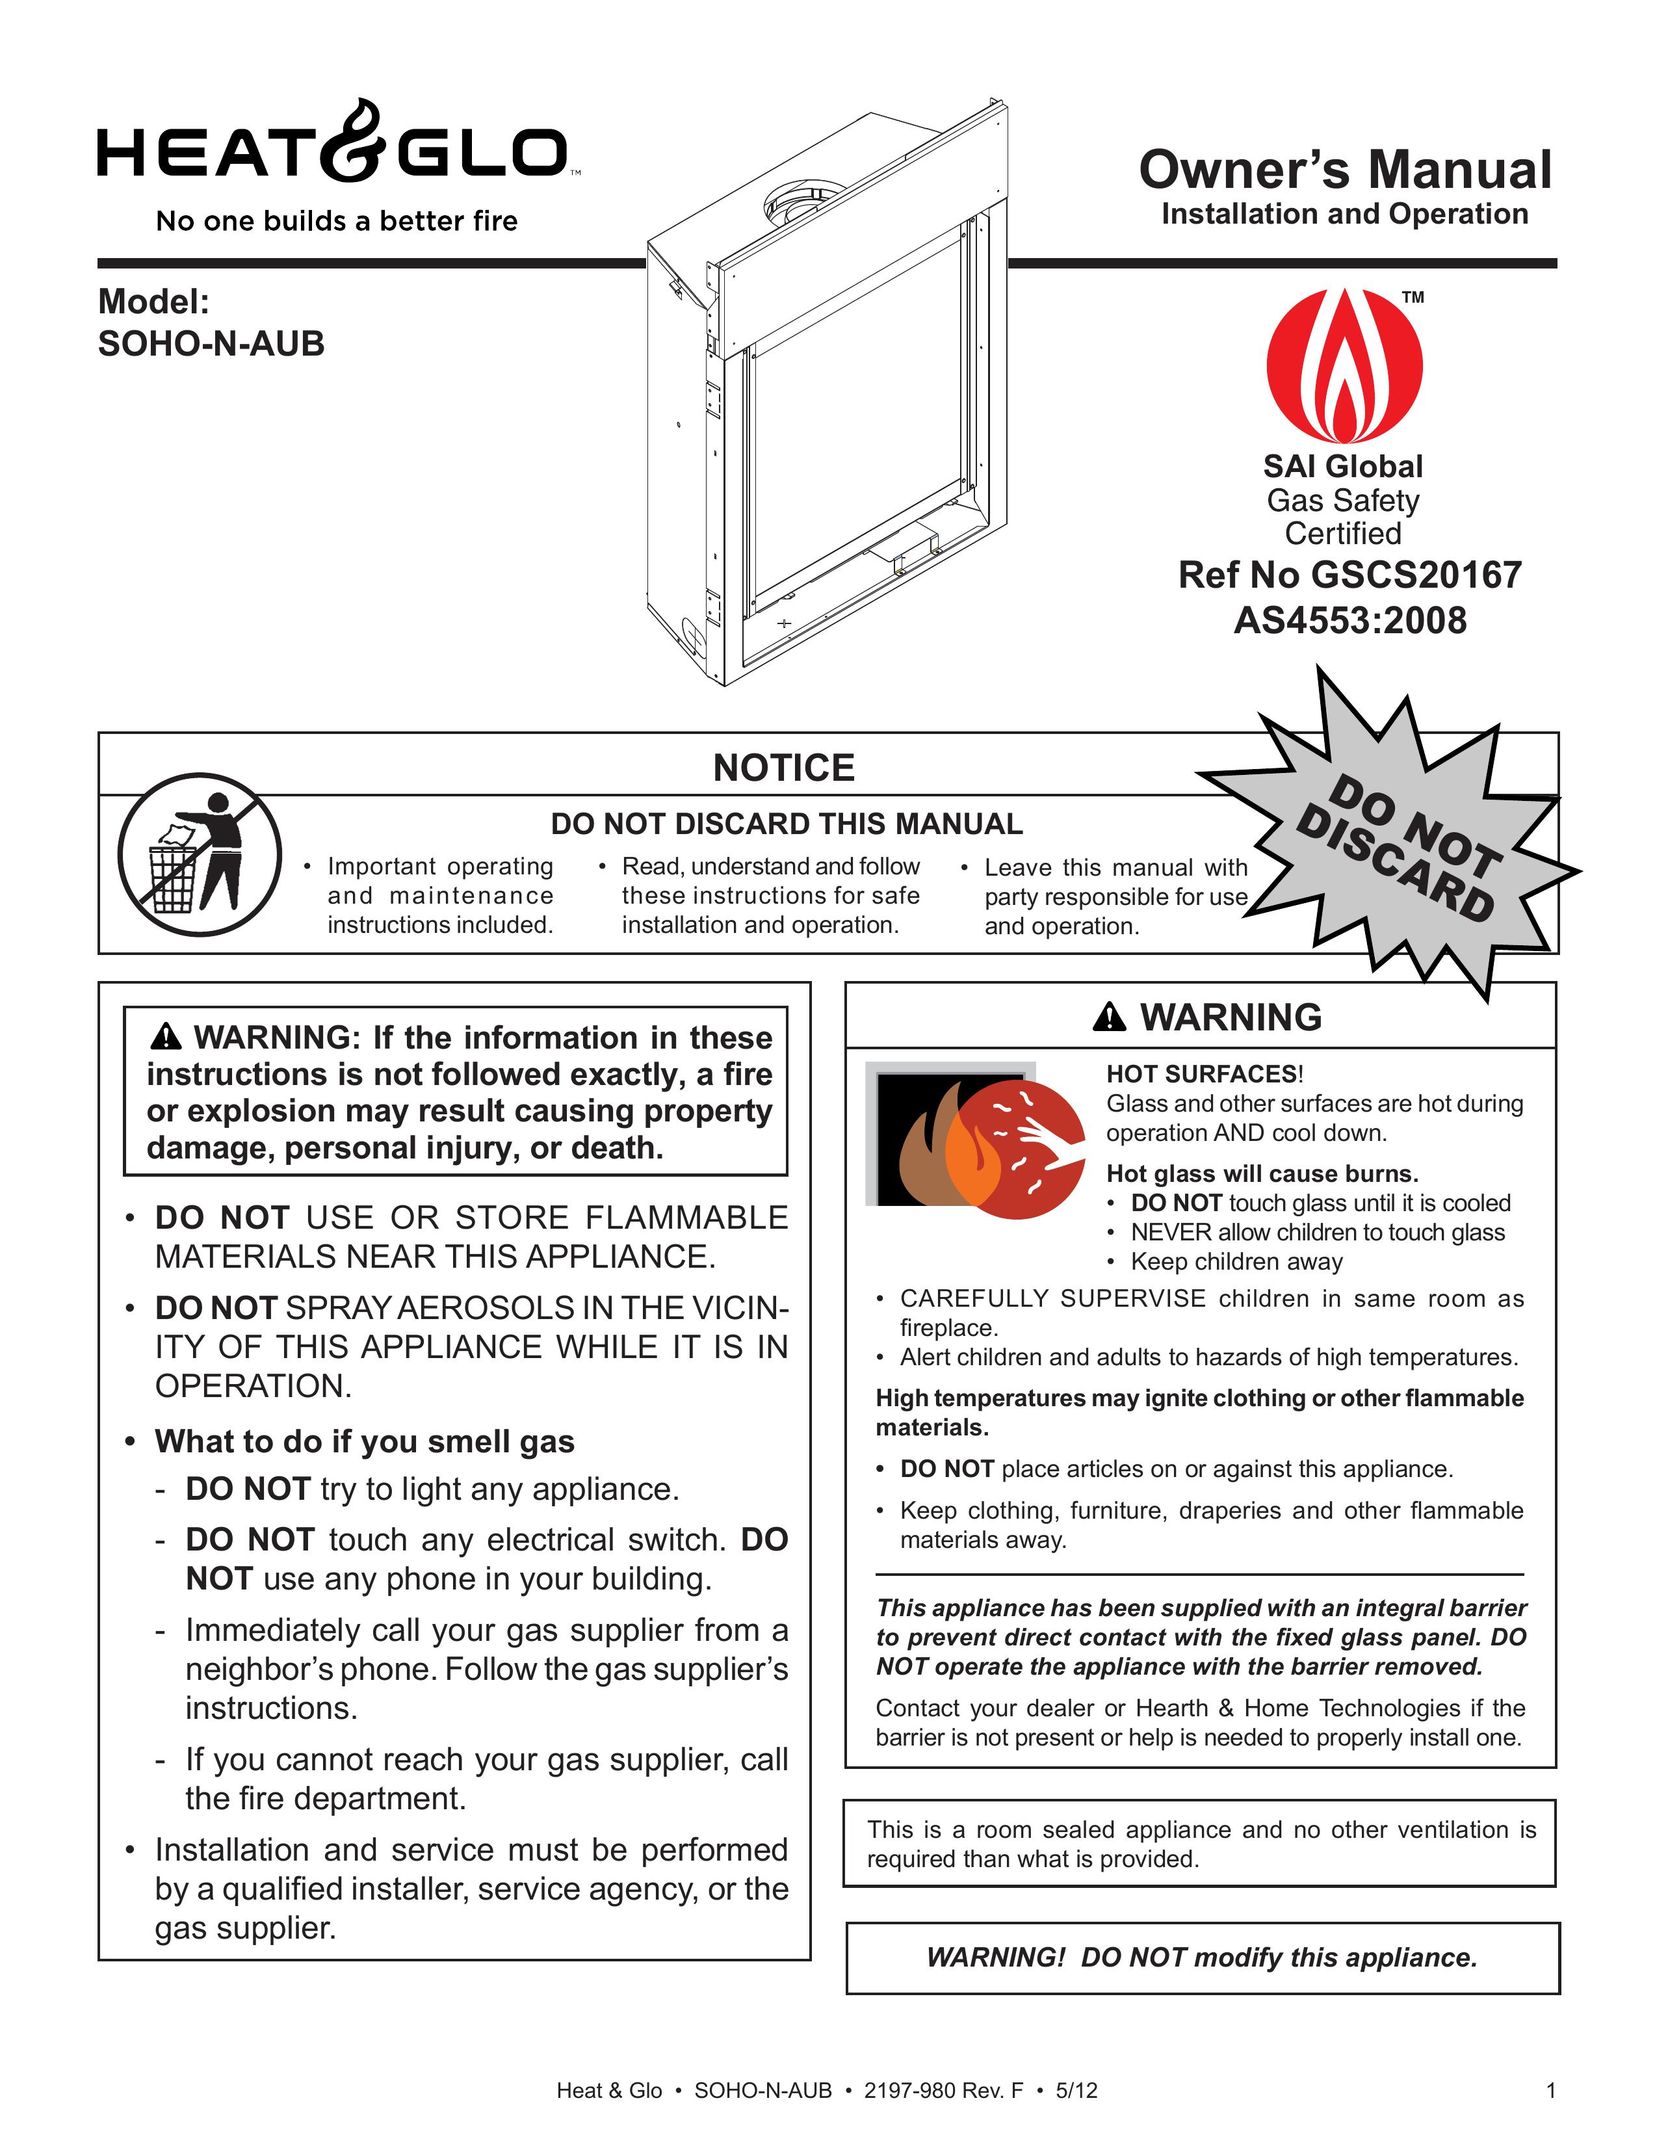 Heat & Glo LifeStyle 2197-980 Indoor Fireplace User Manual